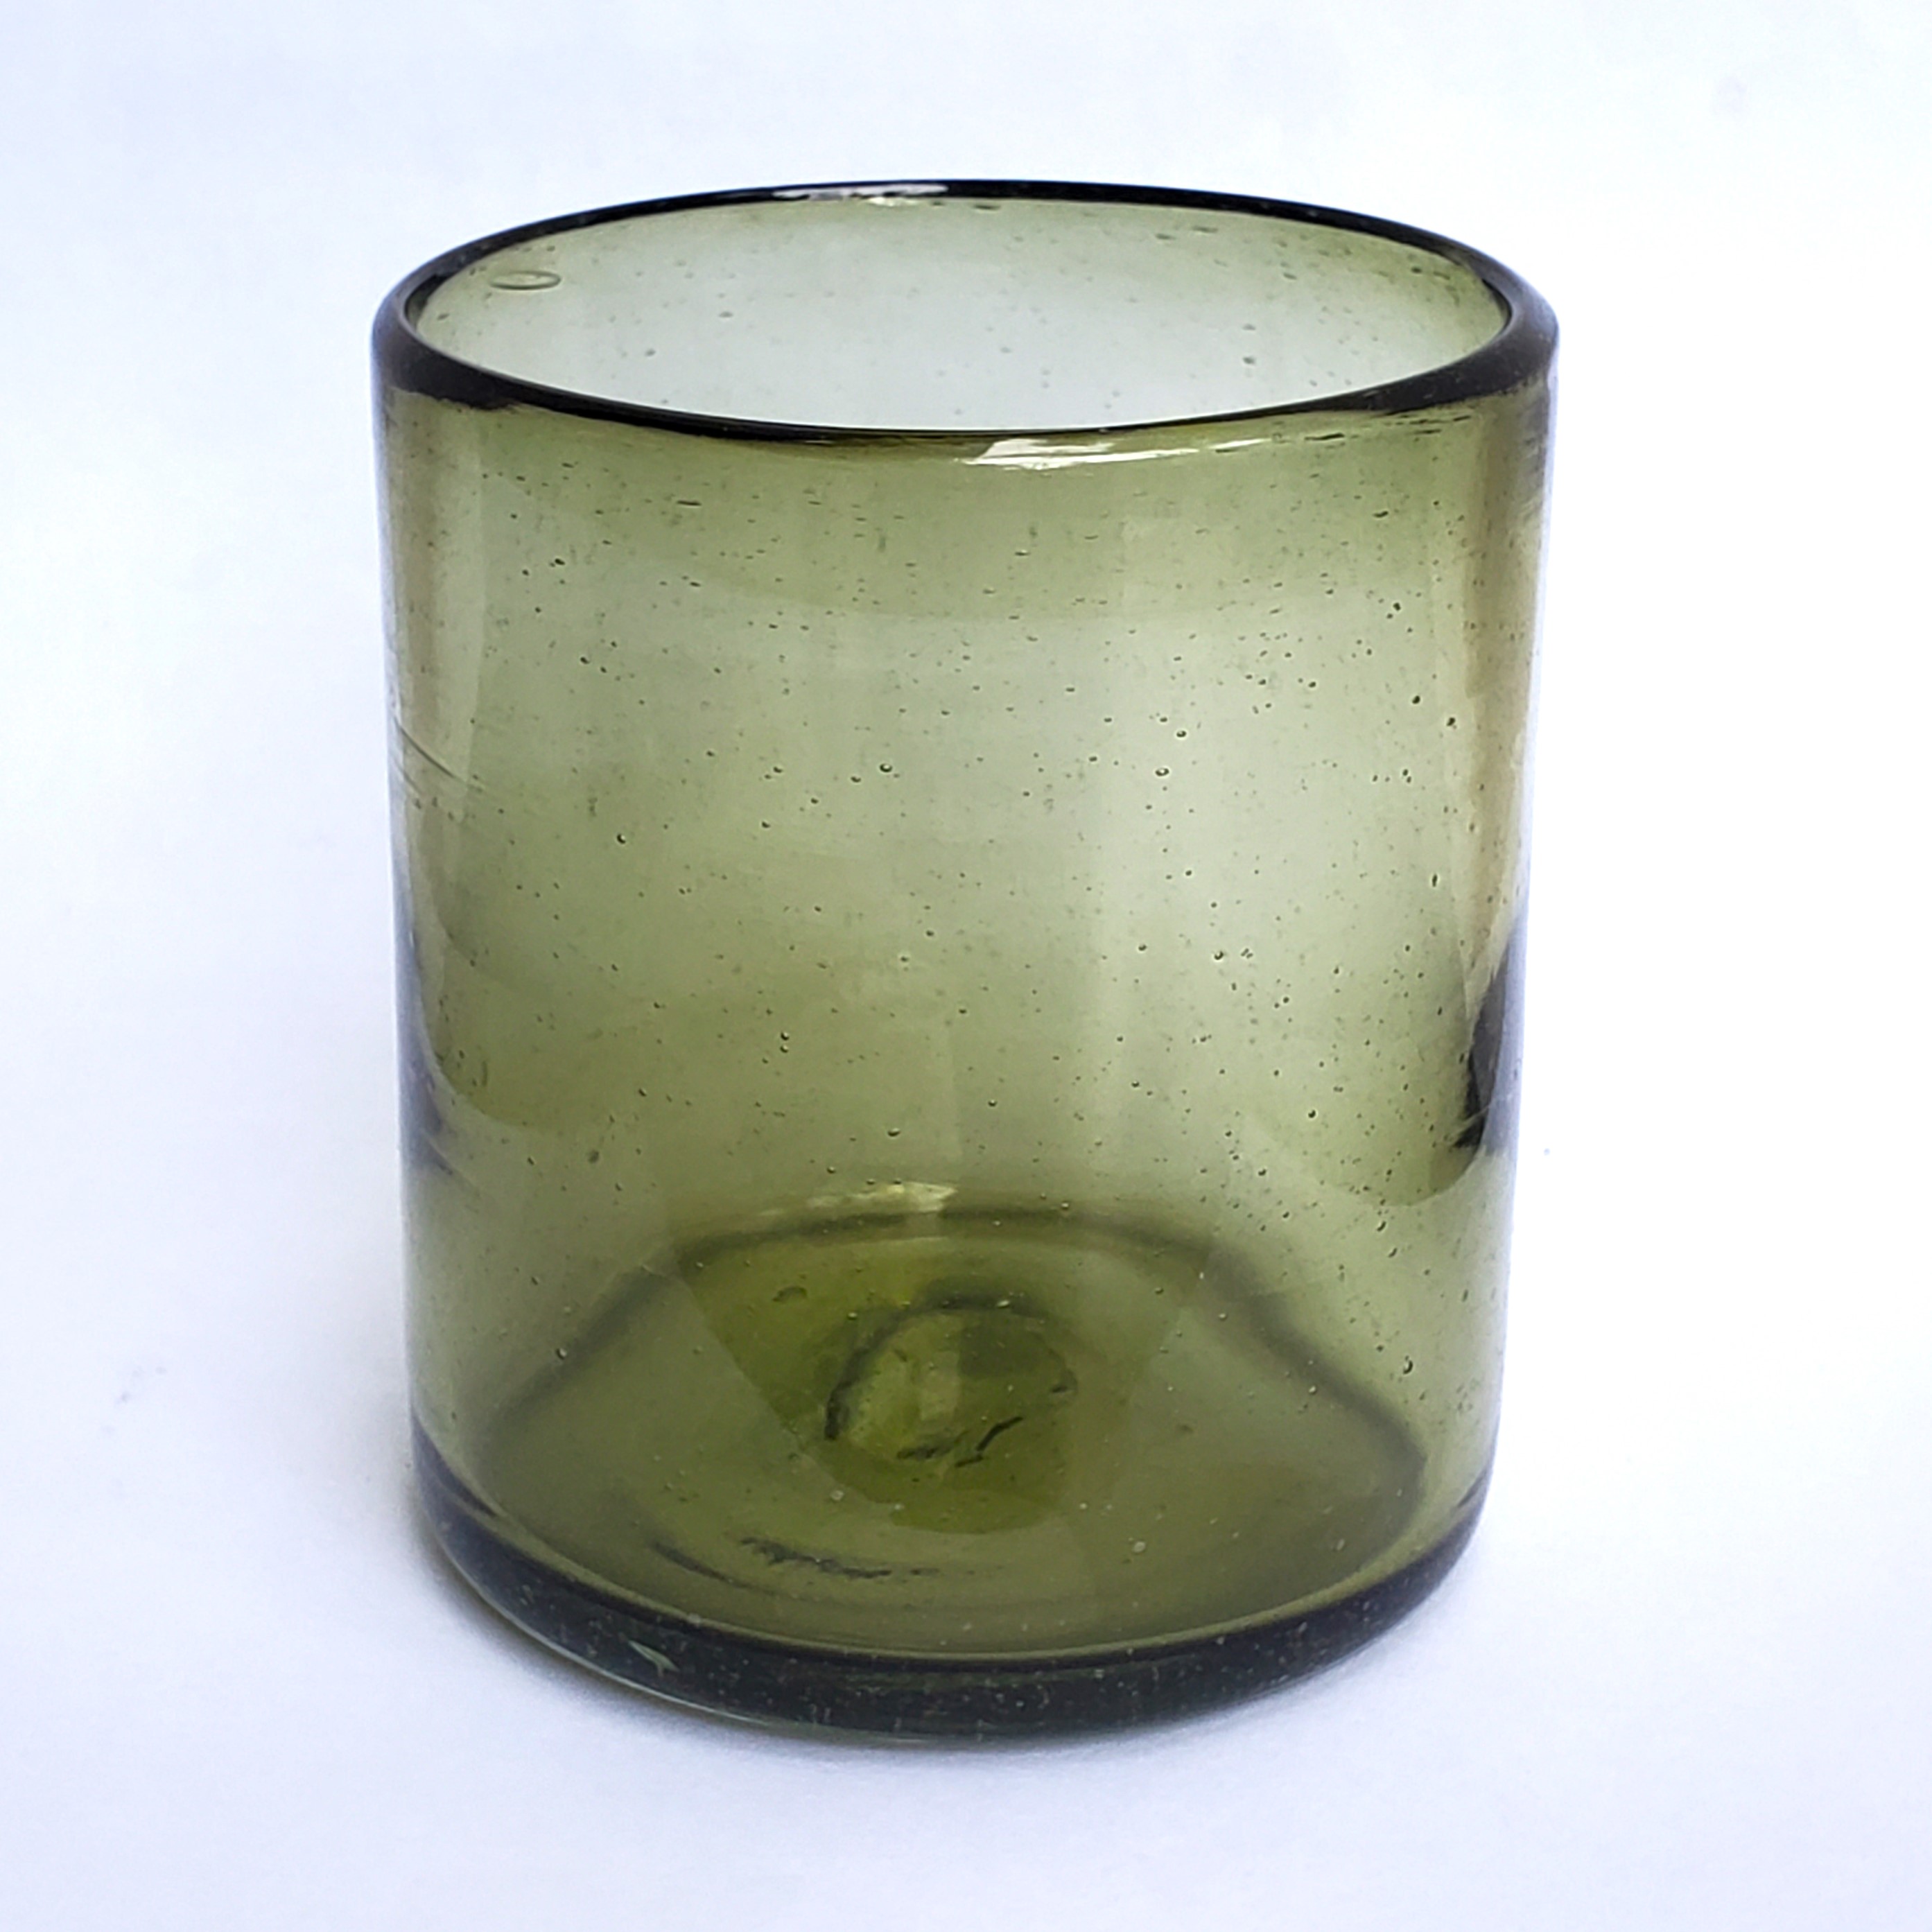 Novedades / Solid Olive Gren 9 oz Short Tumblers (set of 6) / Enhance your table setting with our beautiful Olive Green colored glasses.